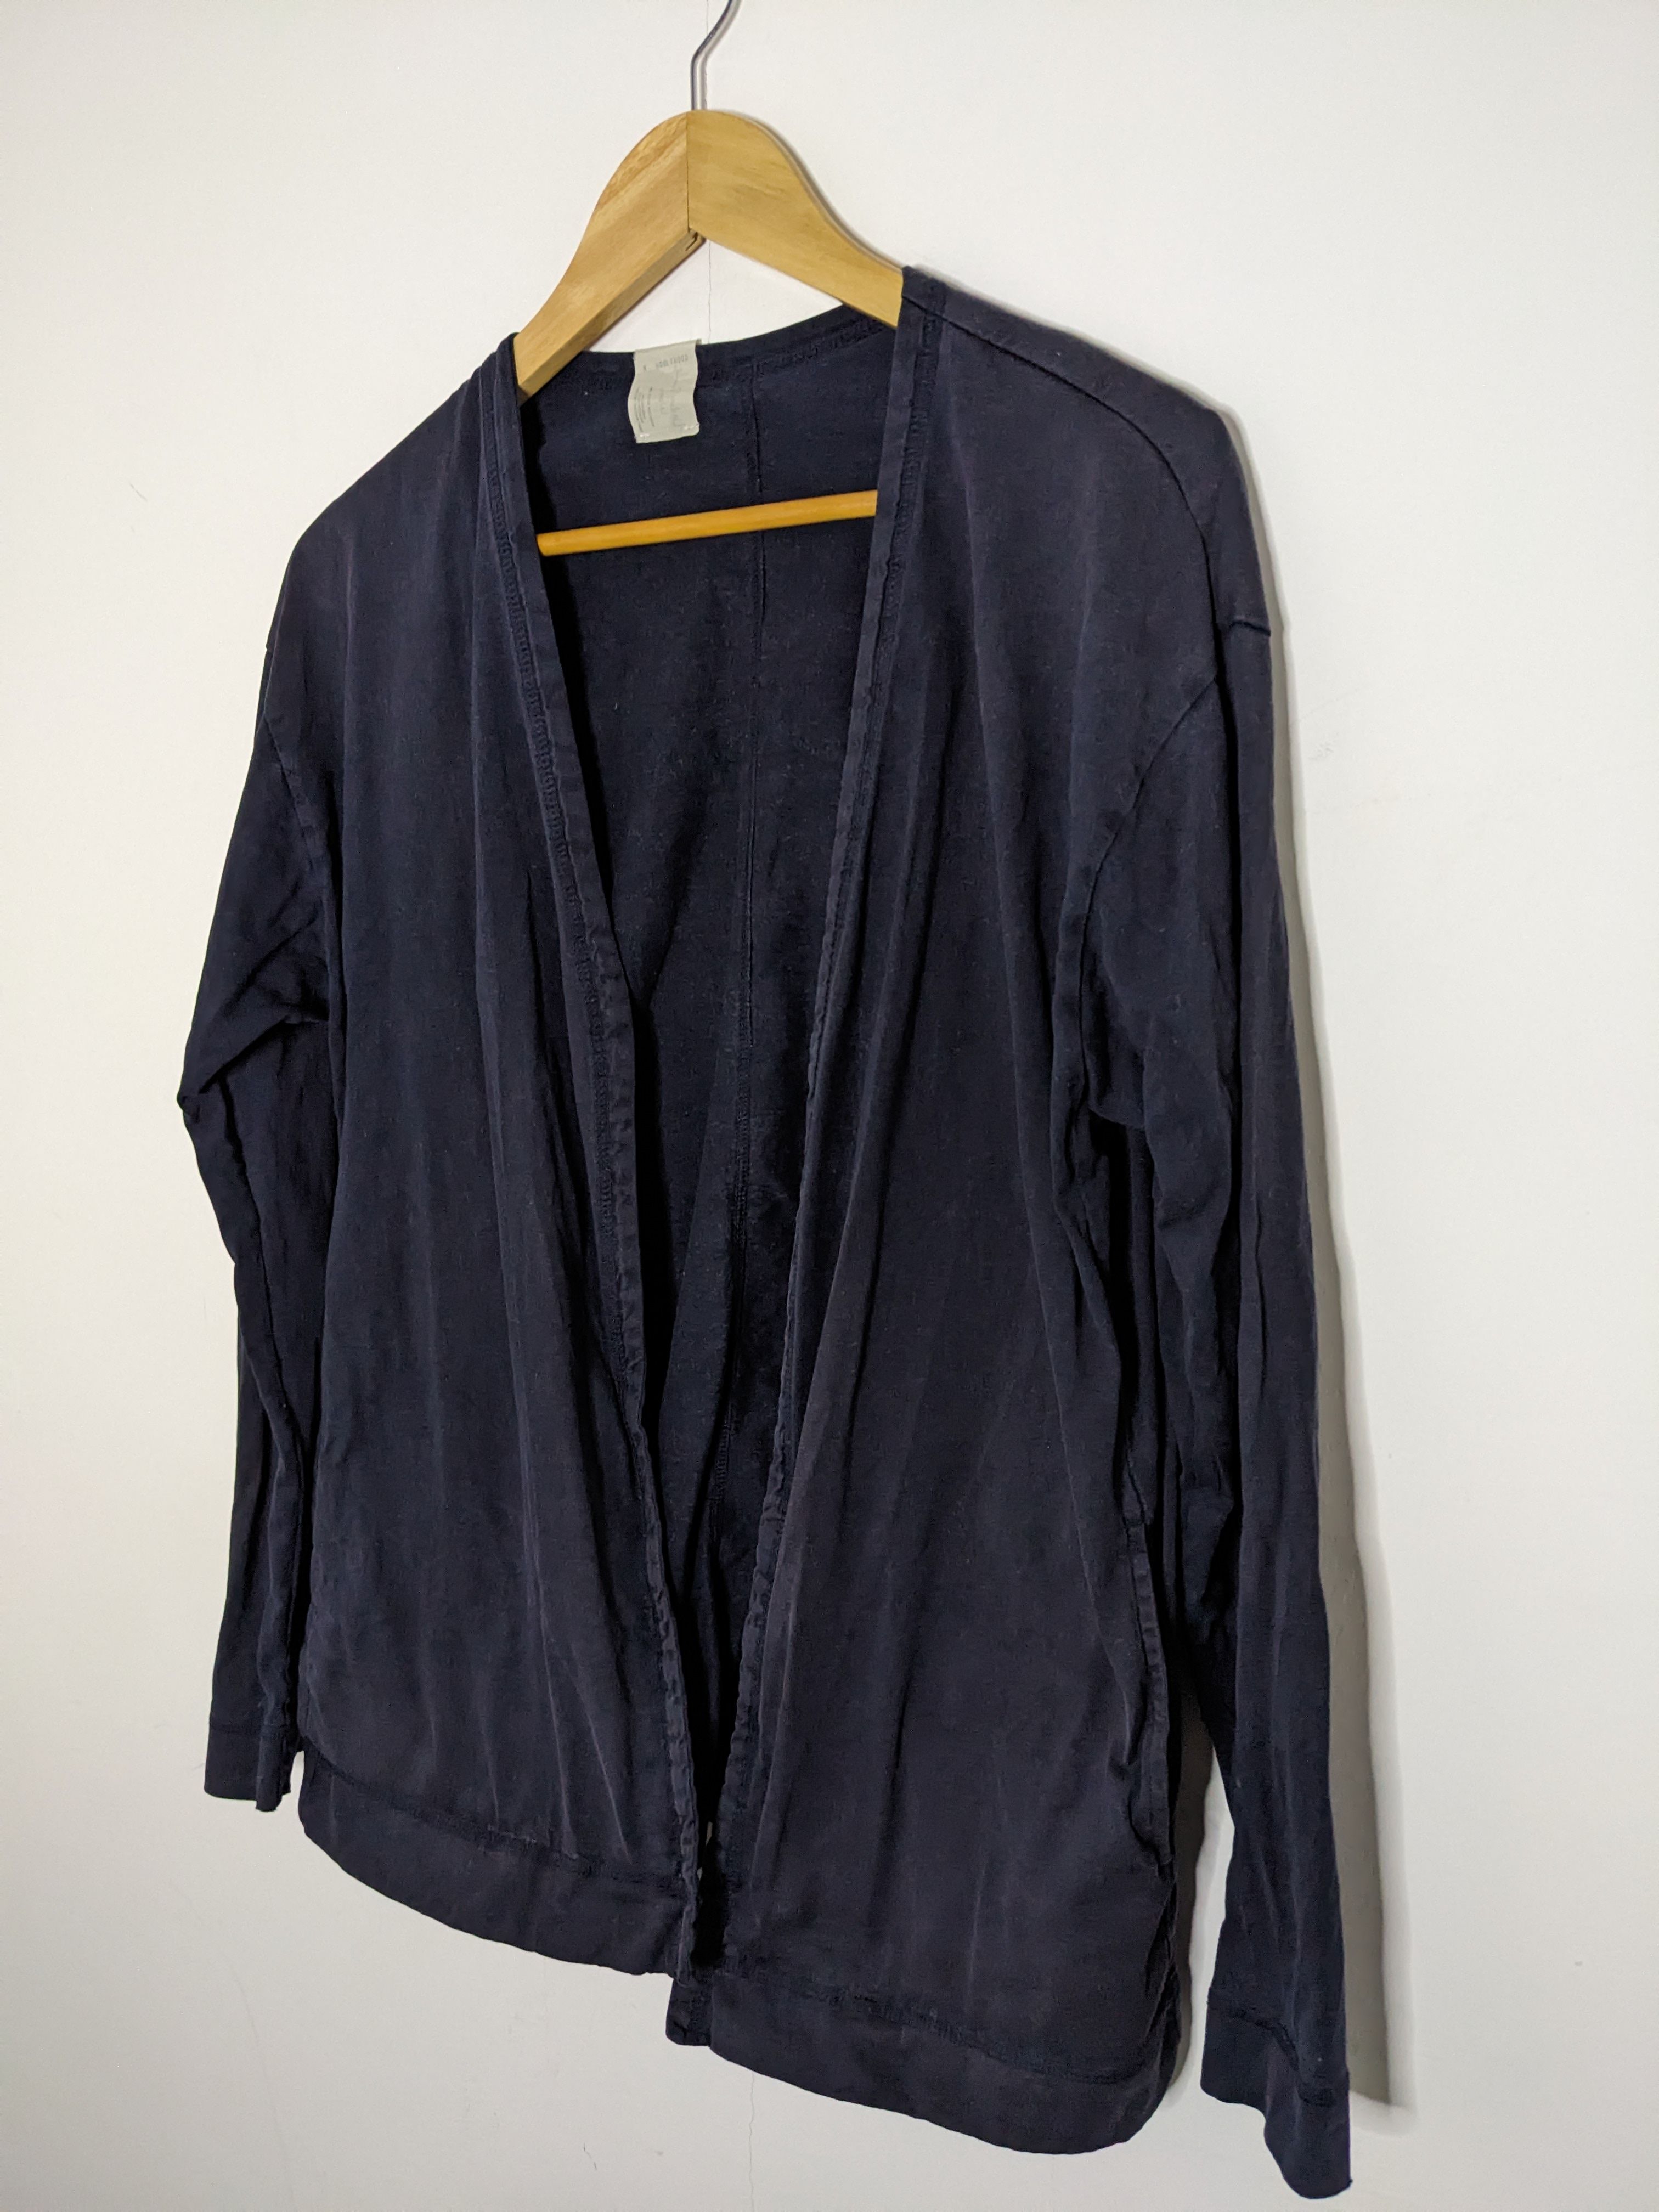 N. Hoolywood Sunfaded Cardigan Buttonless Navy Blue - 2